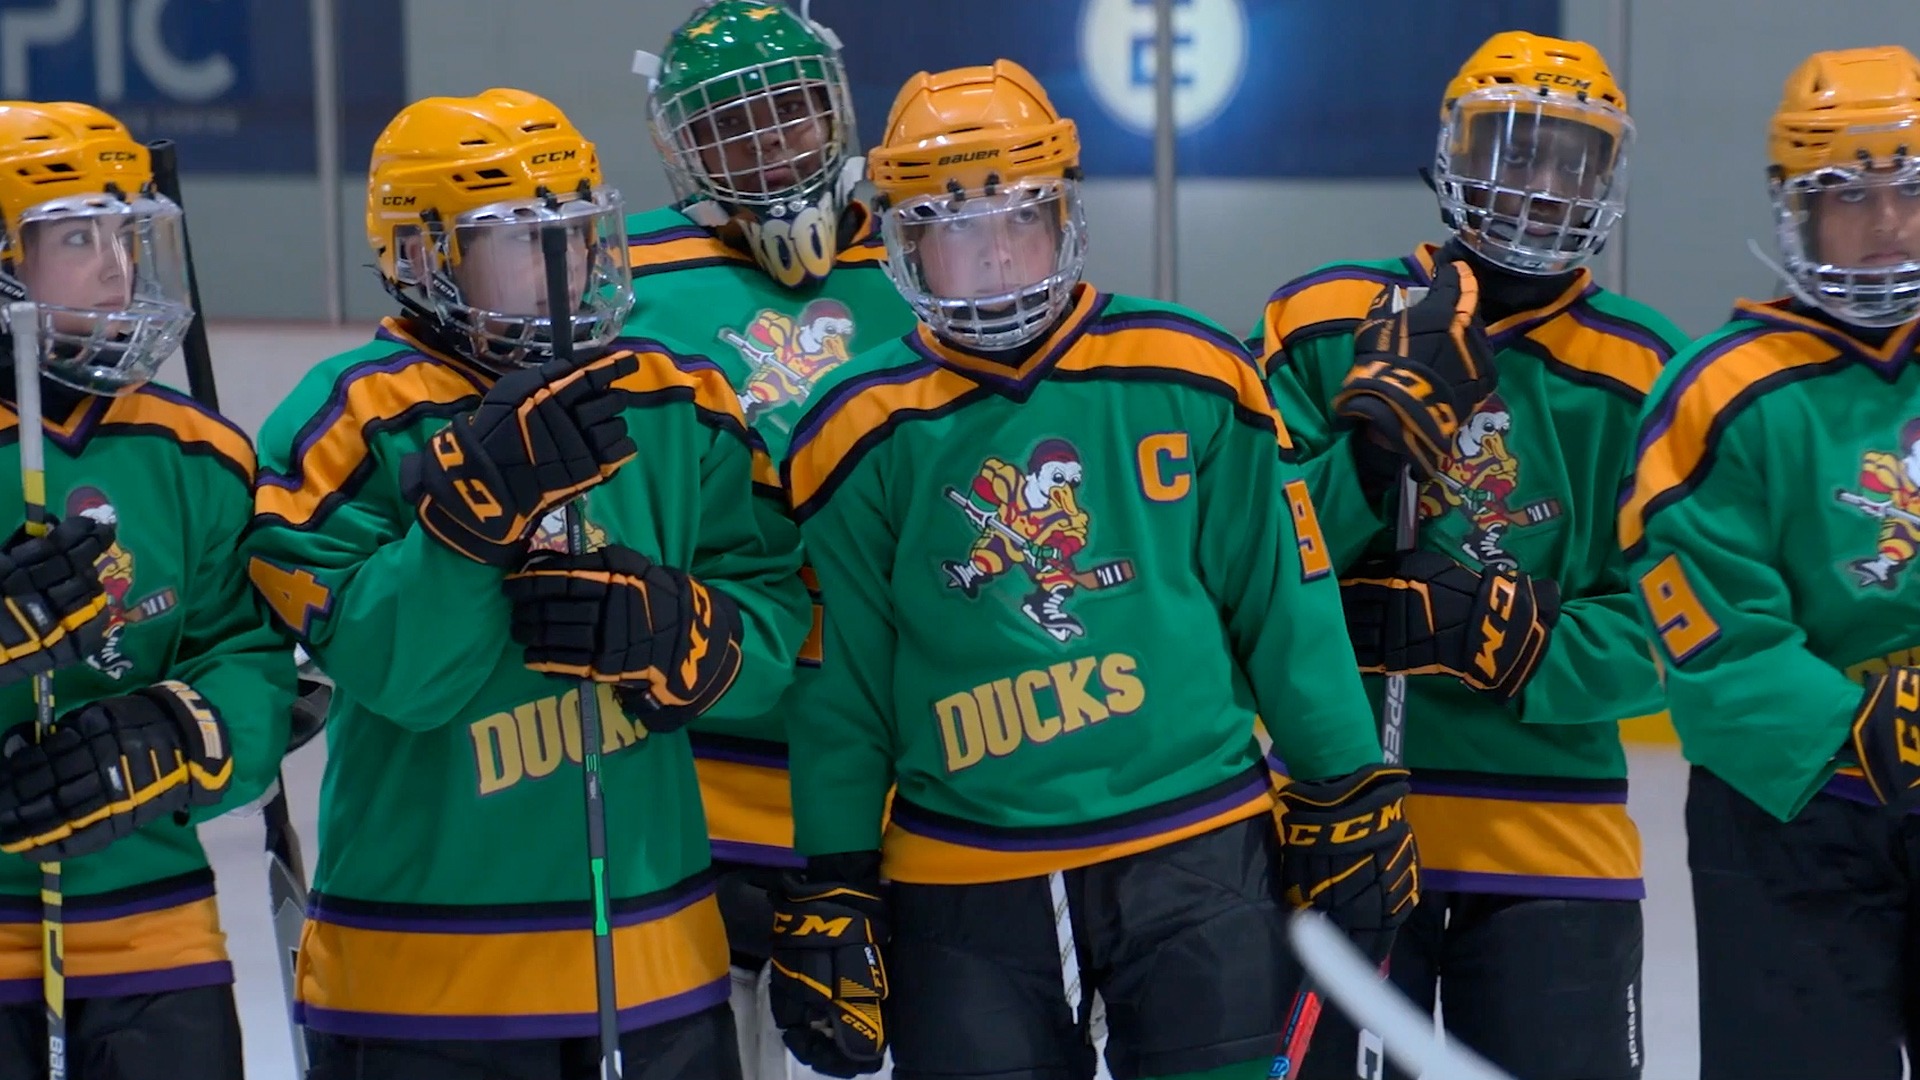 Disney+ Releases The Mighty Ducks: Game Changers Season 2 Trailer